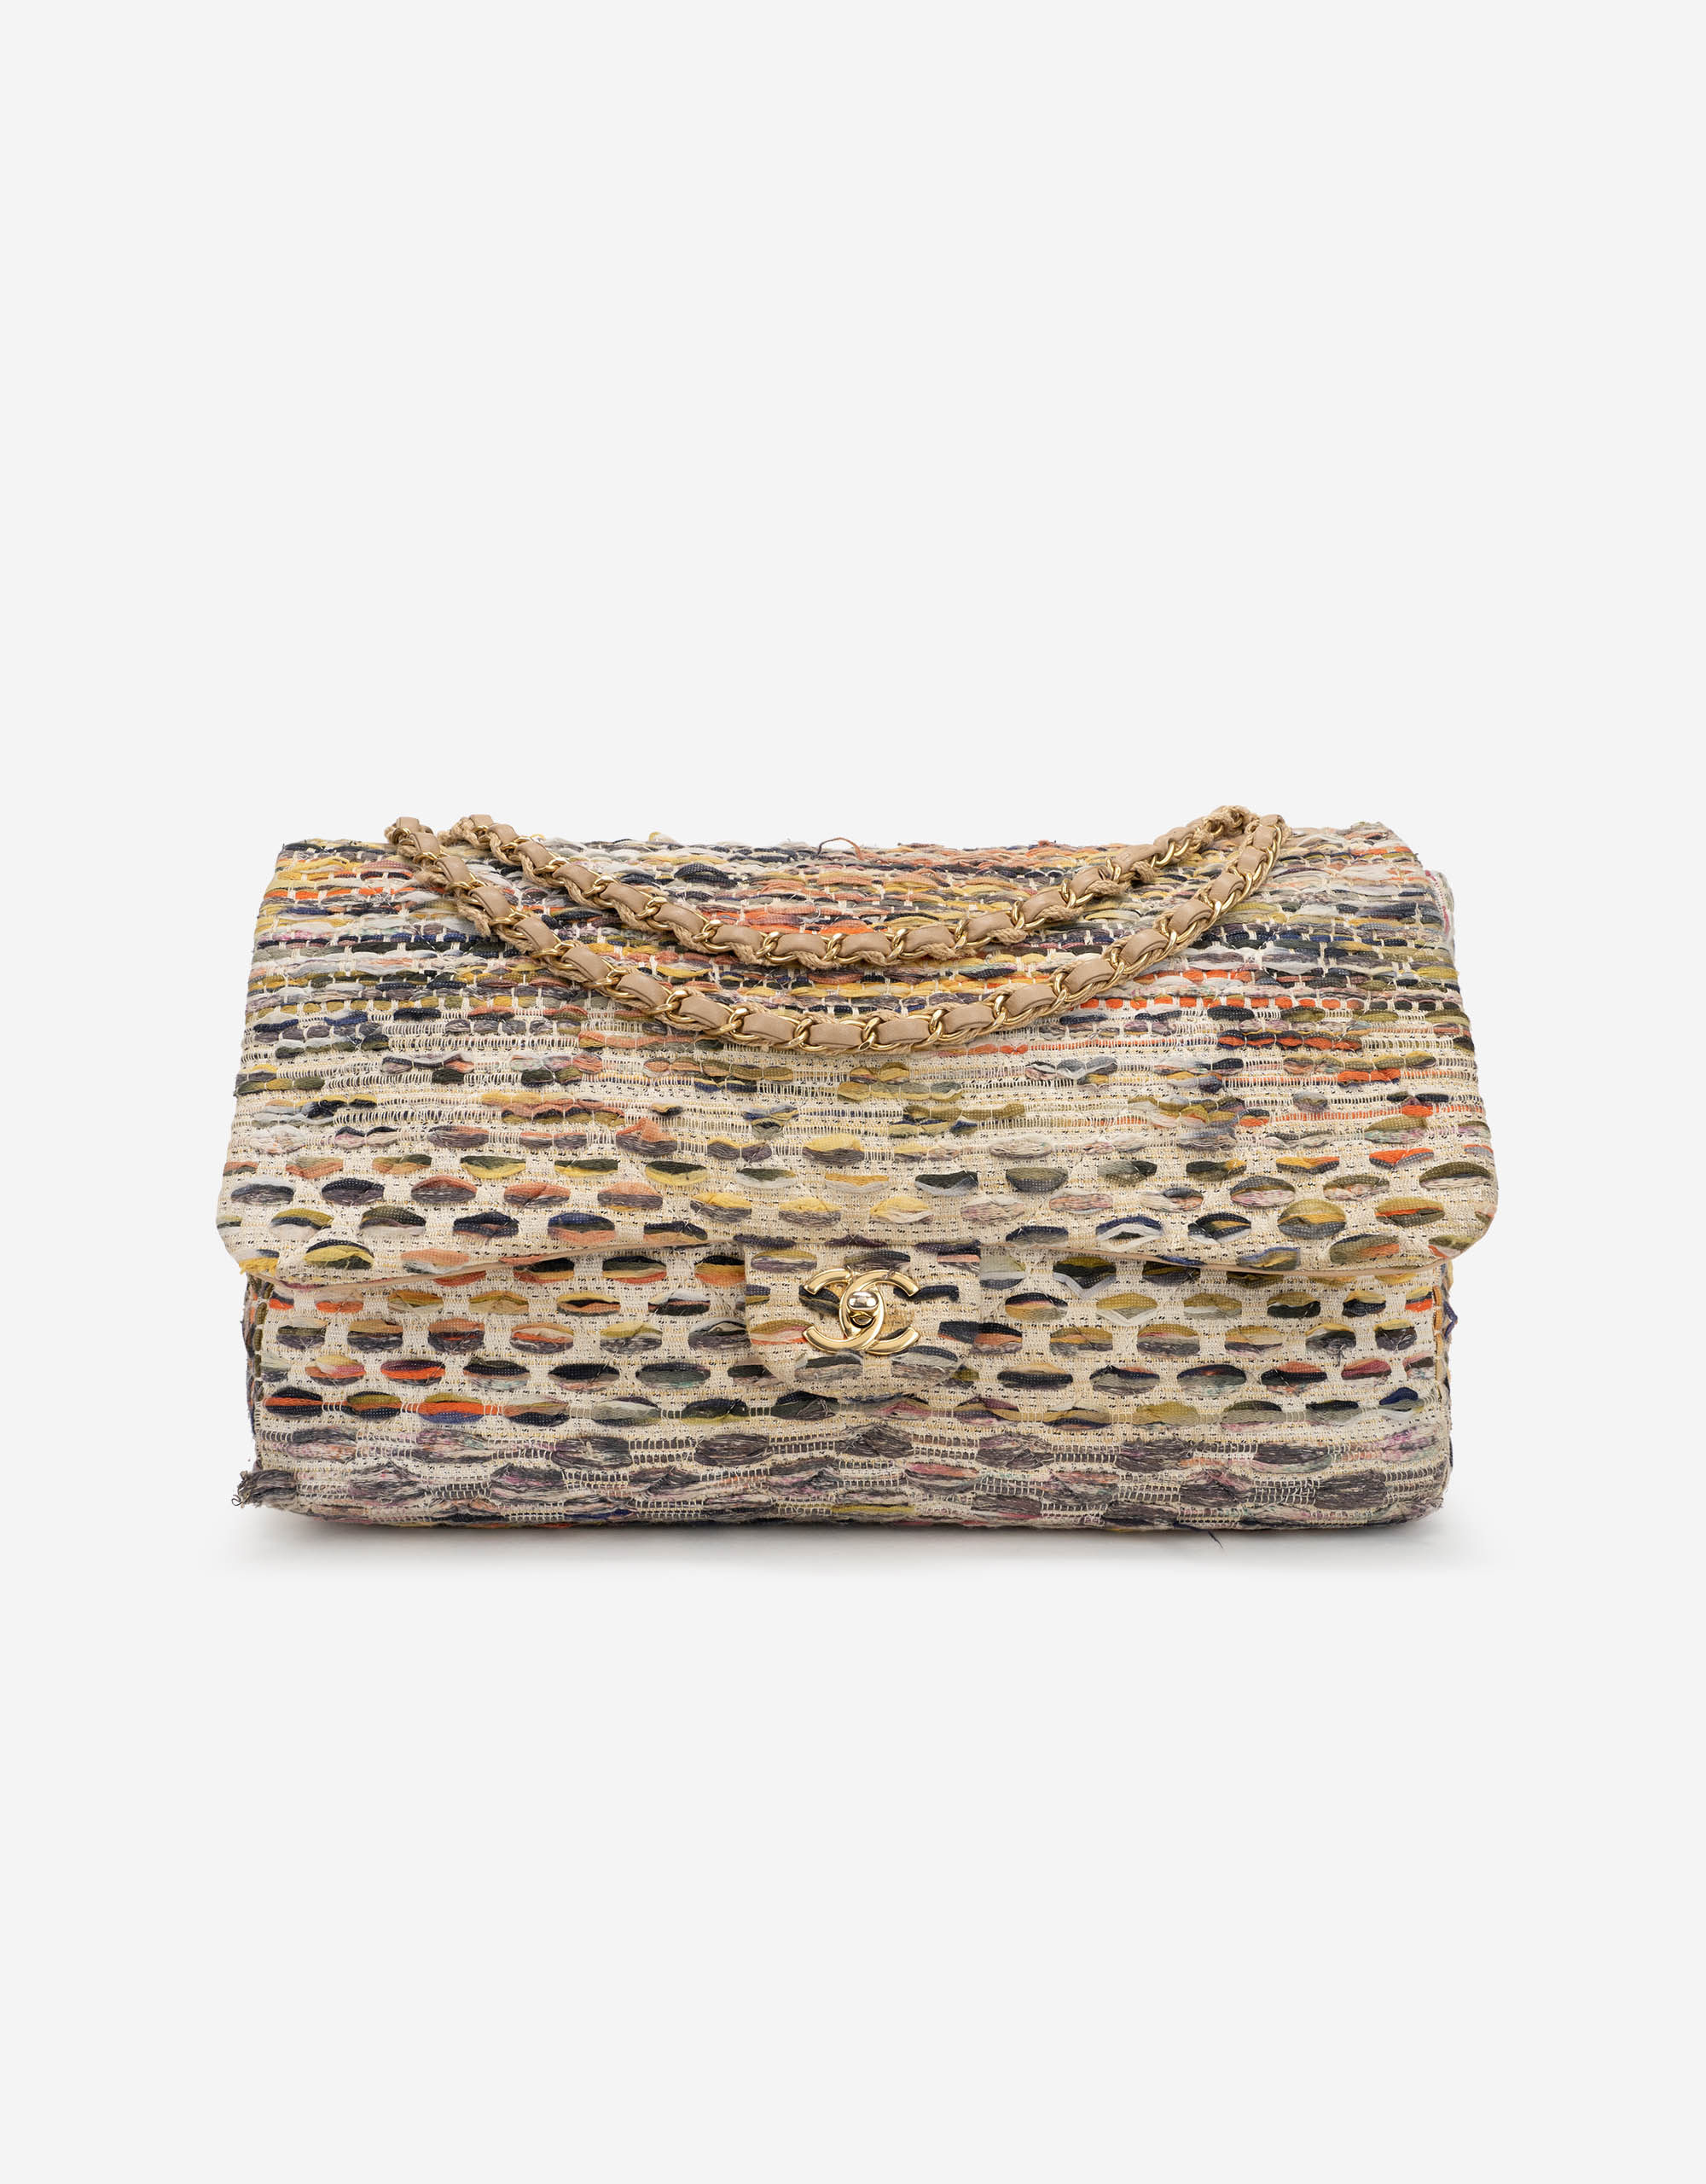 Chanel Timeless Maxi Tweed Multicolour